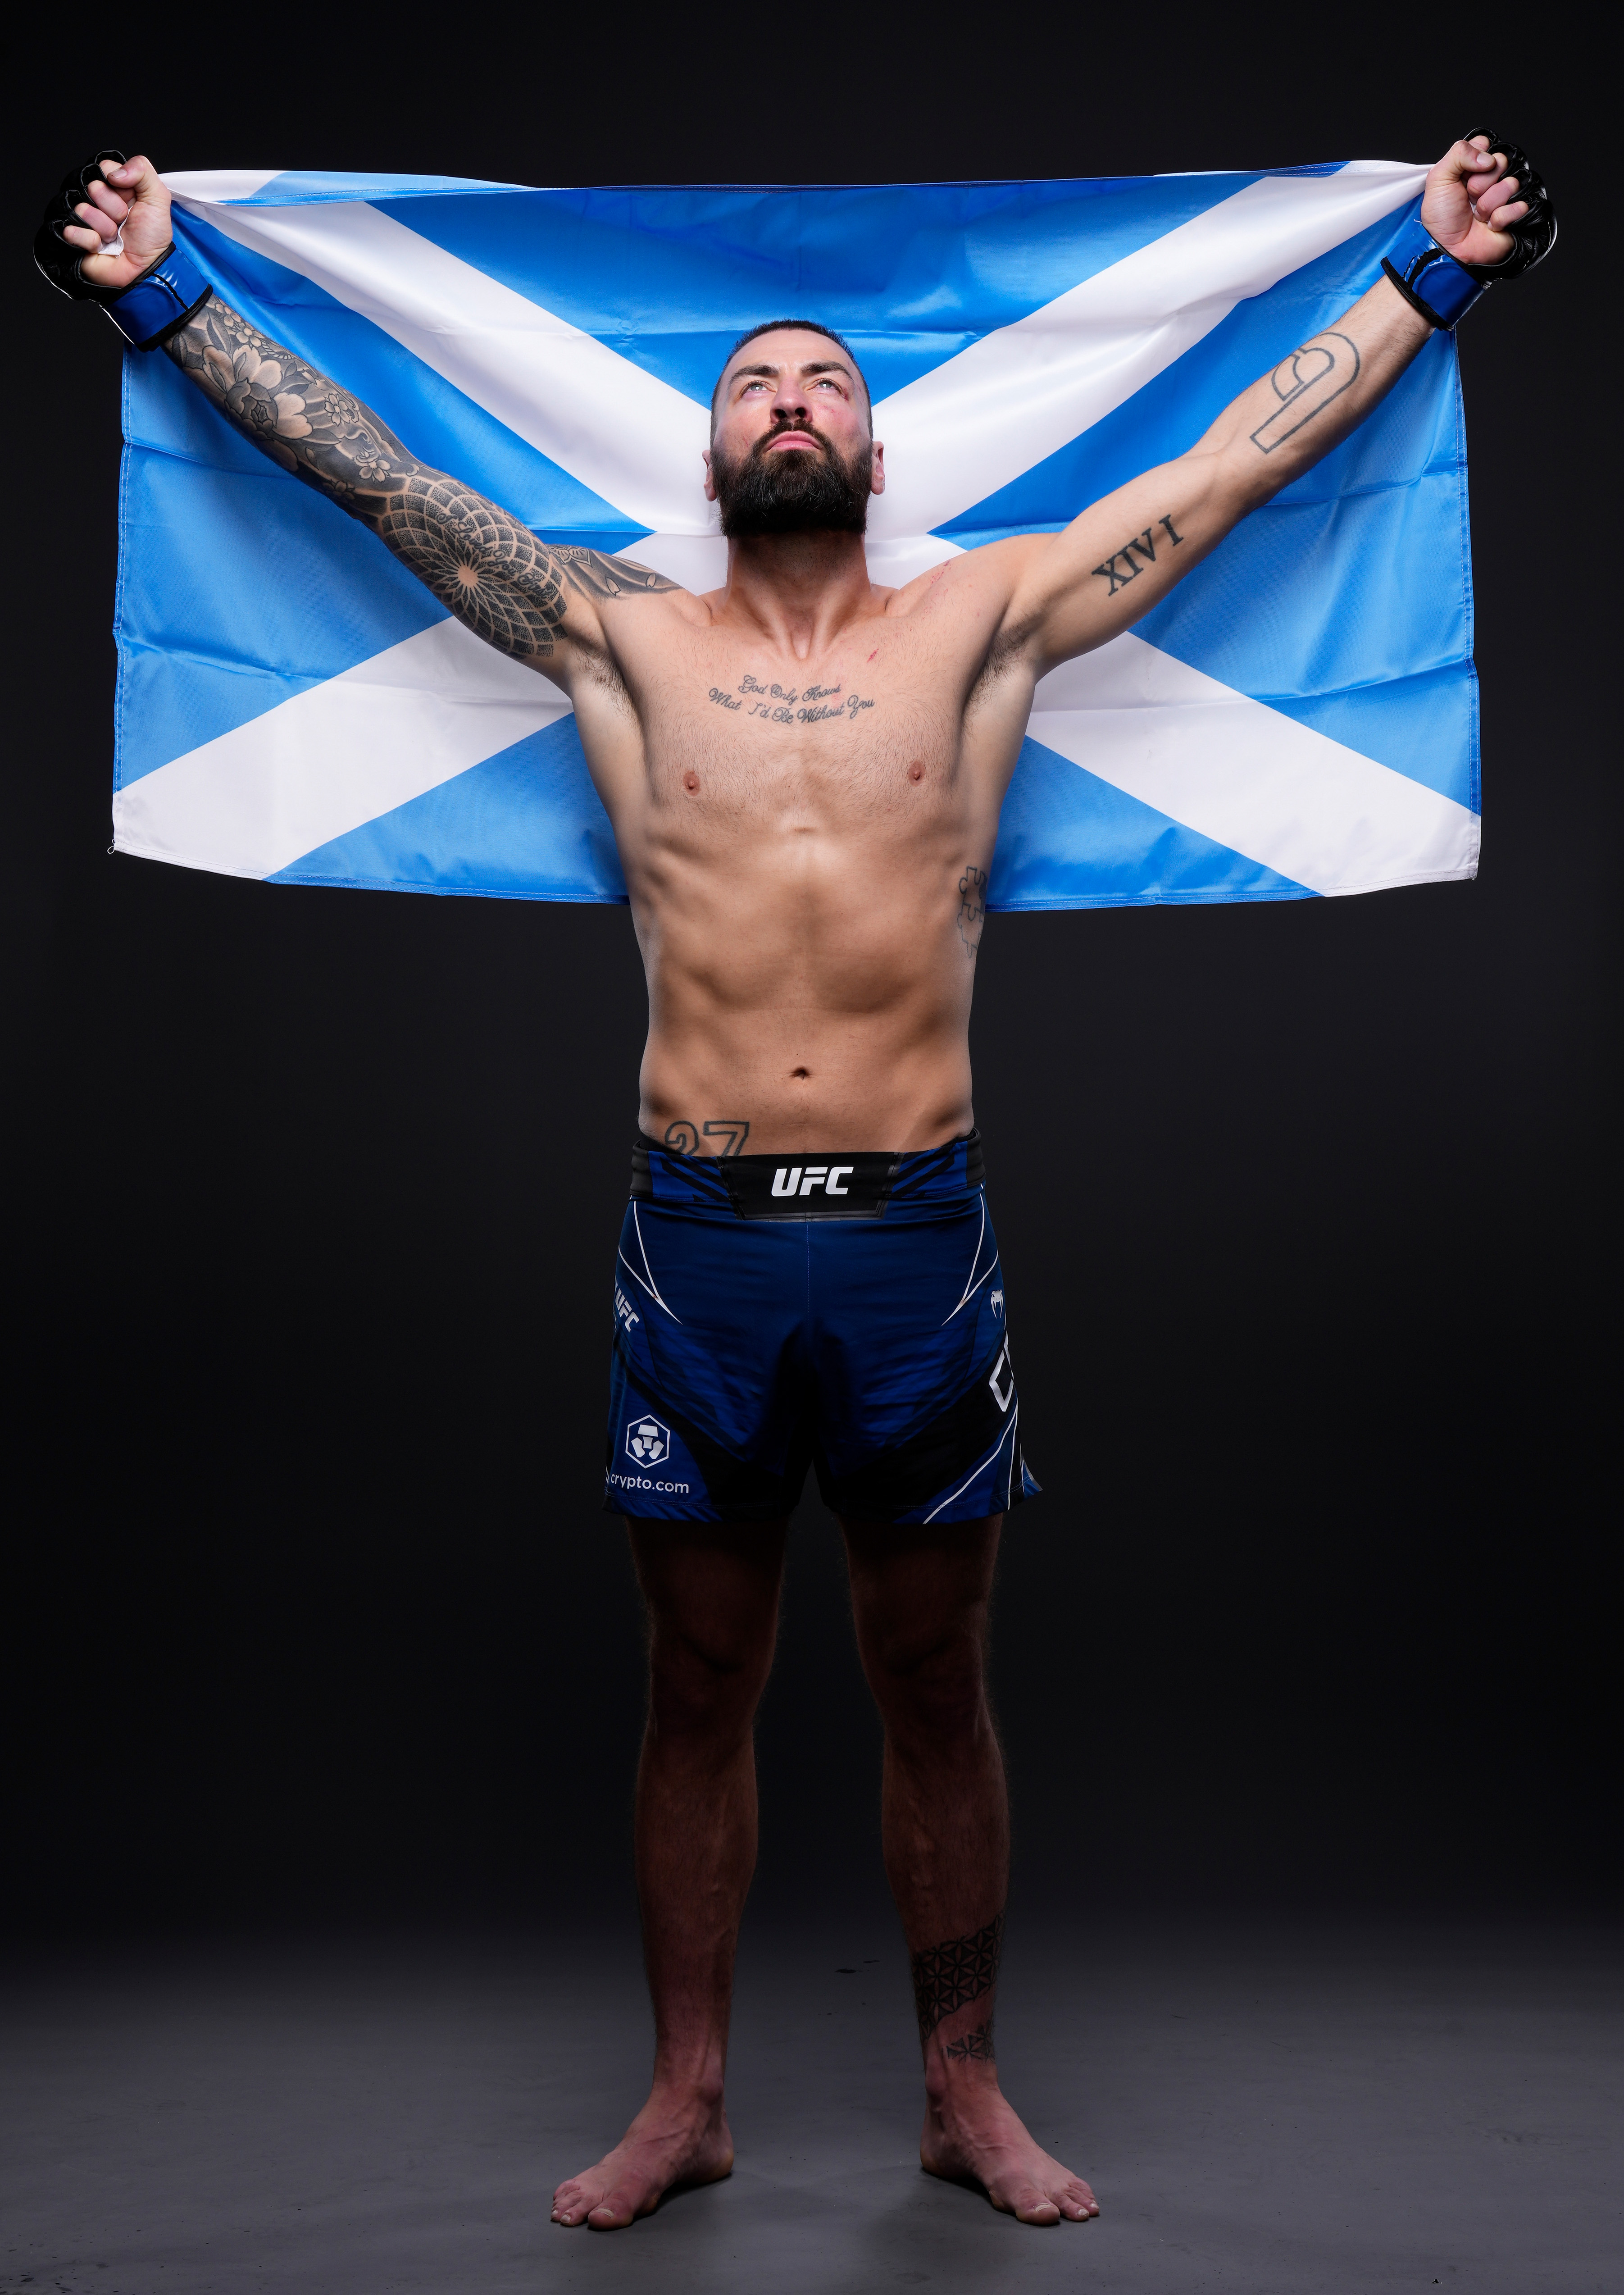 Paul Craig poses for a portrait after his UFC London win over Nikita Krylov.